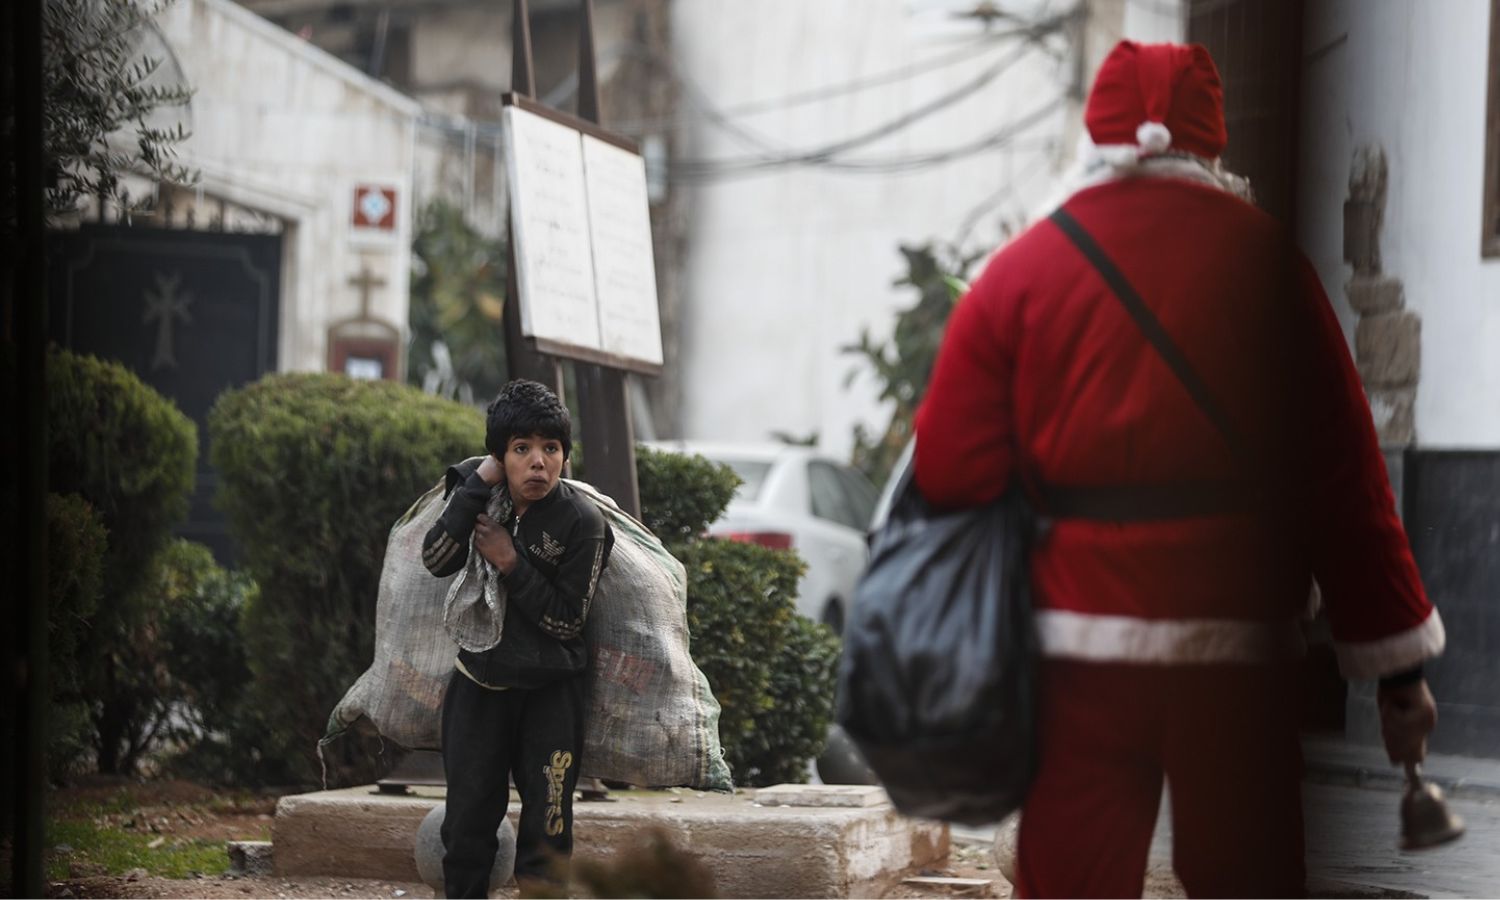 Face to face “Santa Claus” carrying a bag of gifts and a child carrying a bag to collect recyclable waste in the Bab Sharqi neighborhood in the Old City of Damascus - 11 December 2022 (Instagram/Omar Sanadiki)